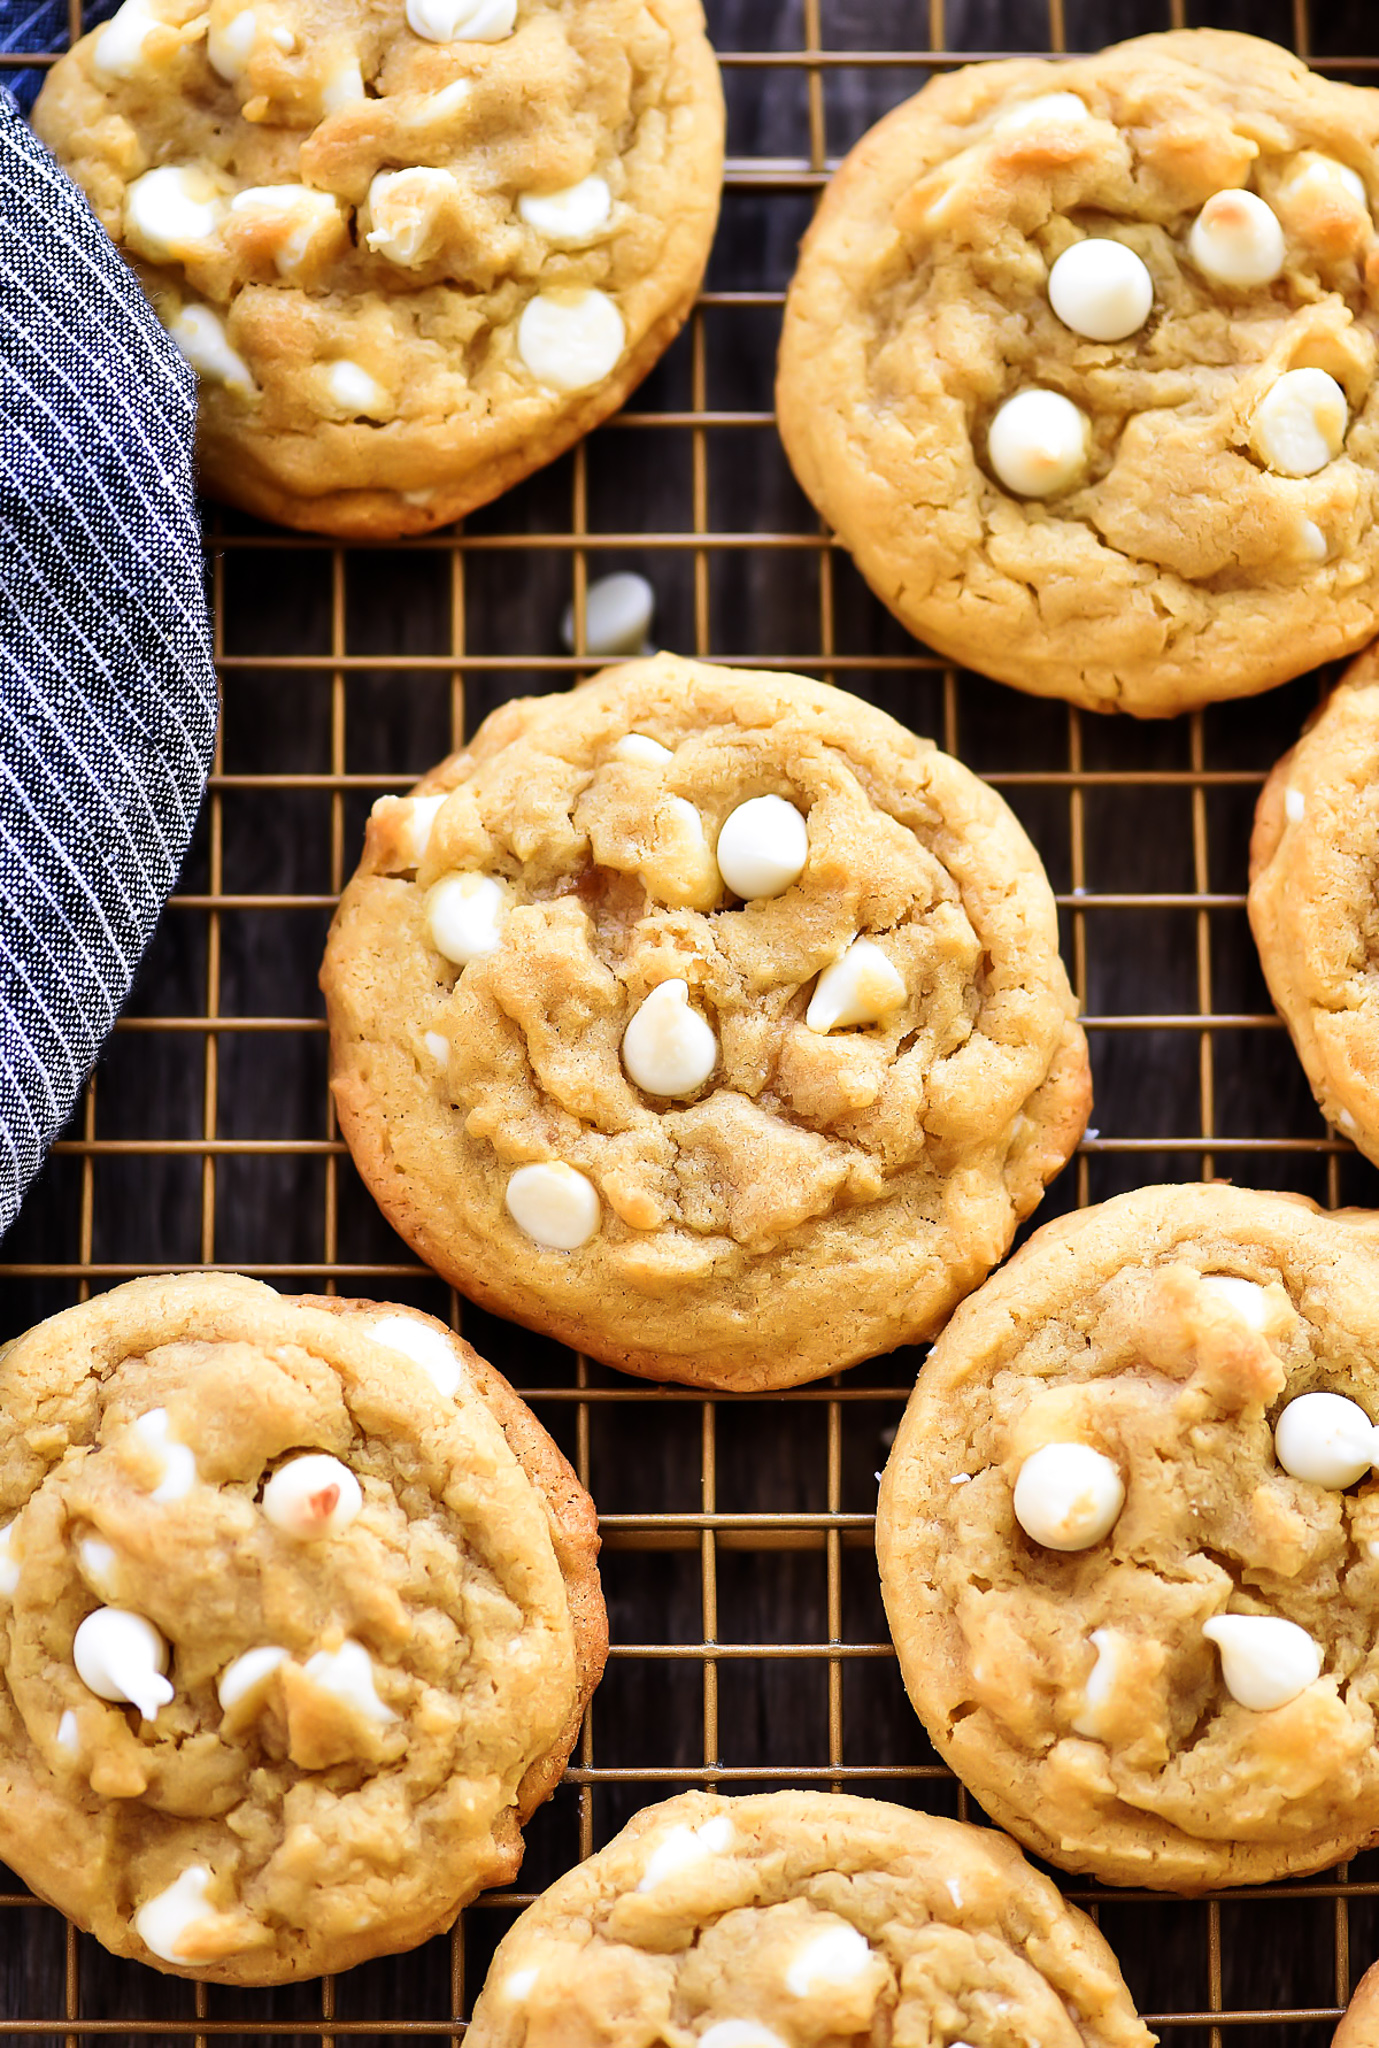 White Chocolate Chip Pudding Cookies are award-winning cookies. They are loaded with white chocolate flavor and are soft, chewy and absolutely amazing!